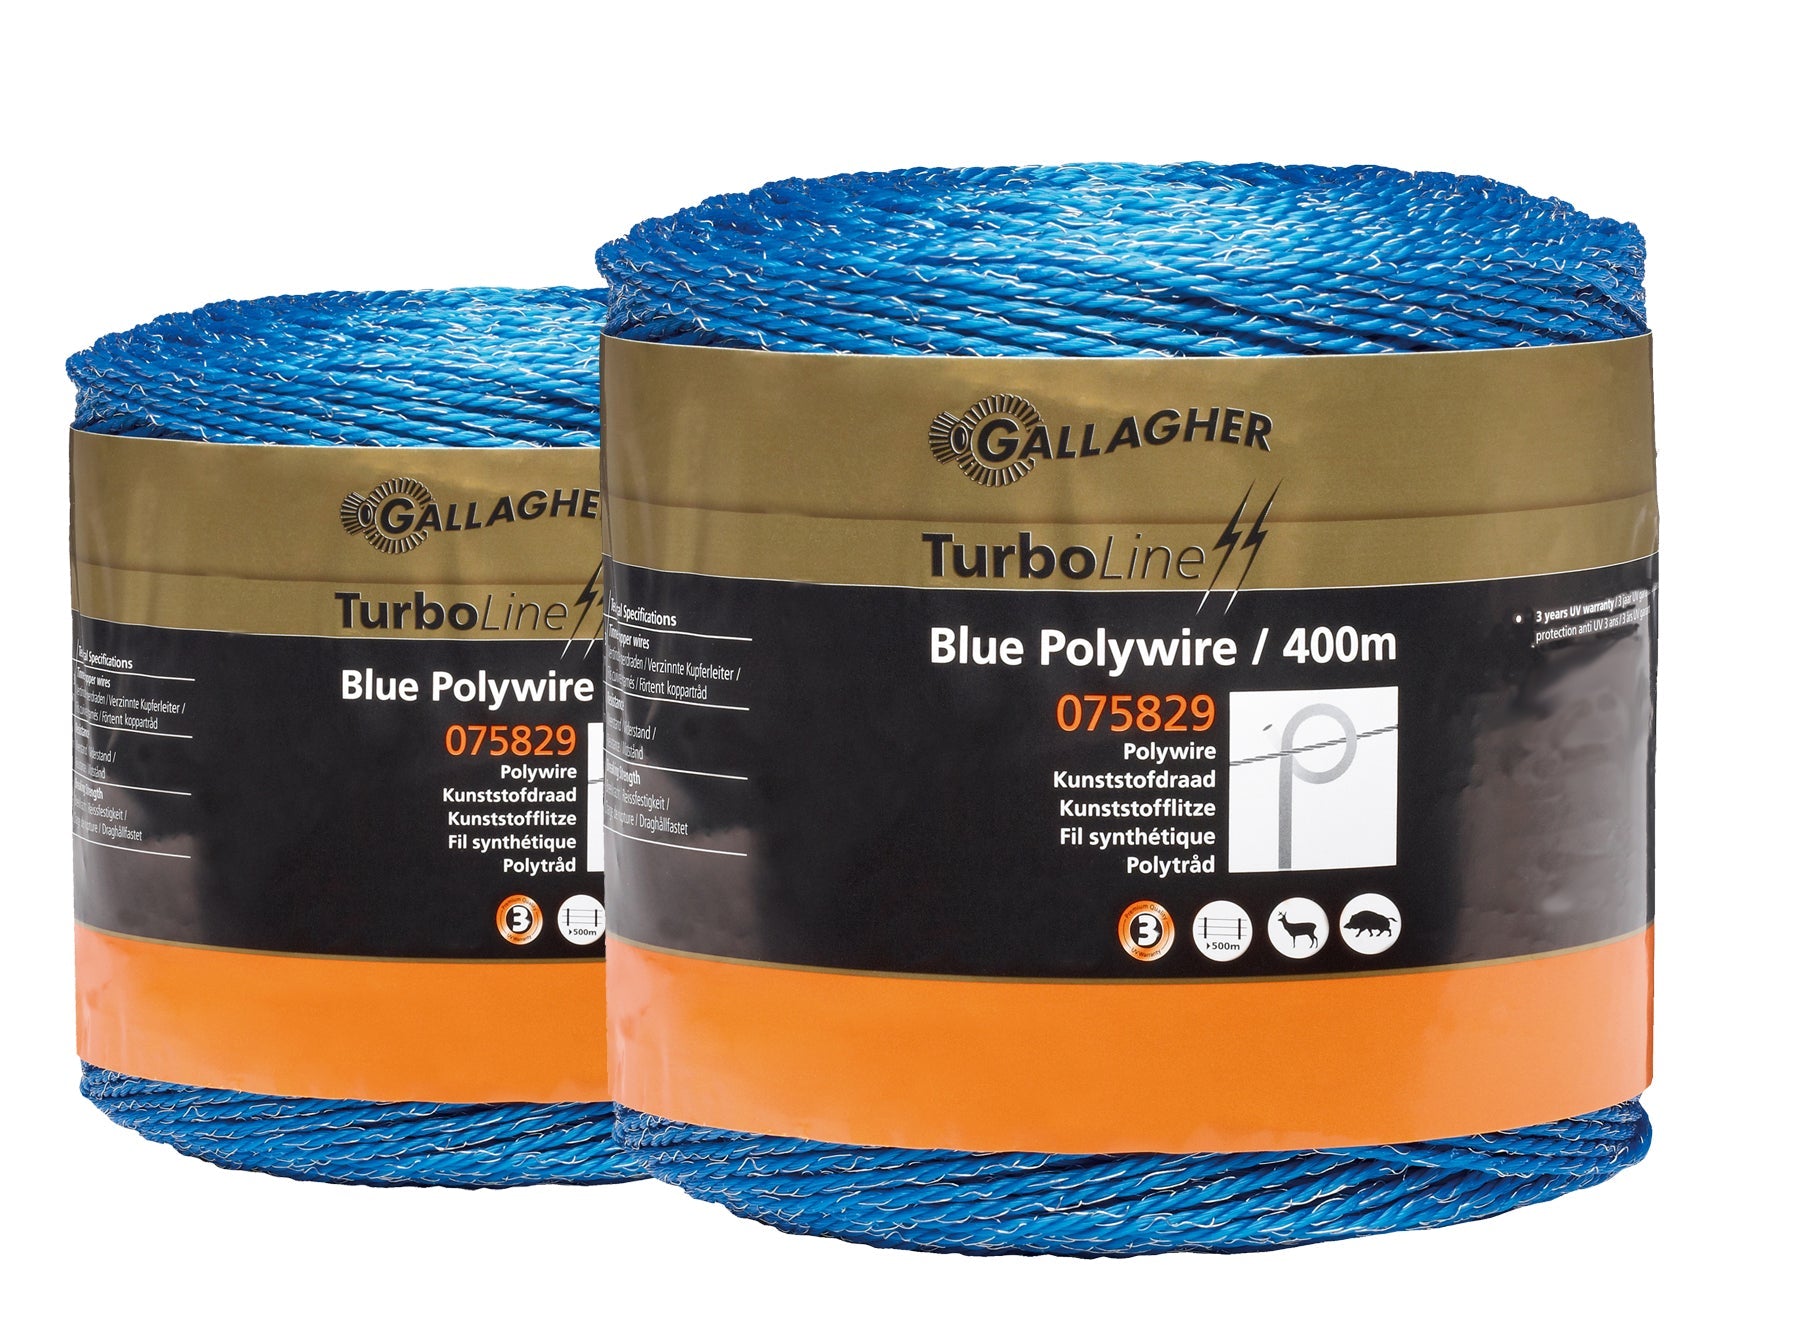 Duopack TurboLine Blue Polywire 2x400m